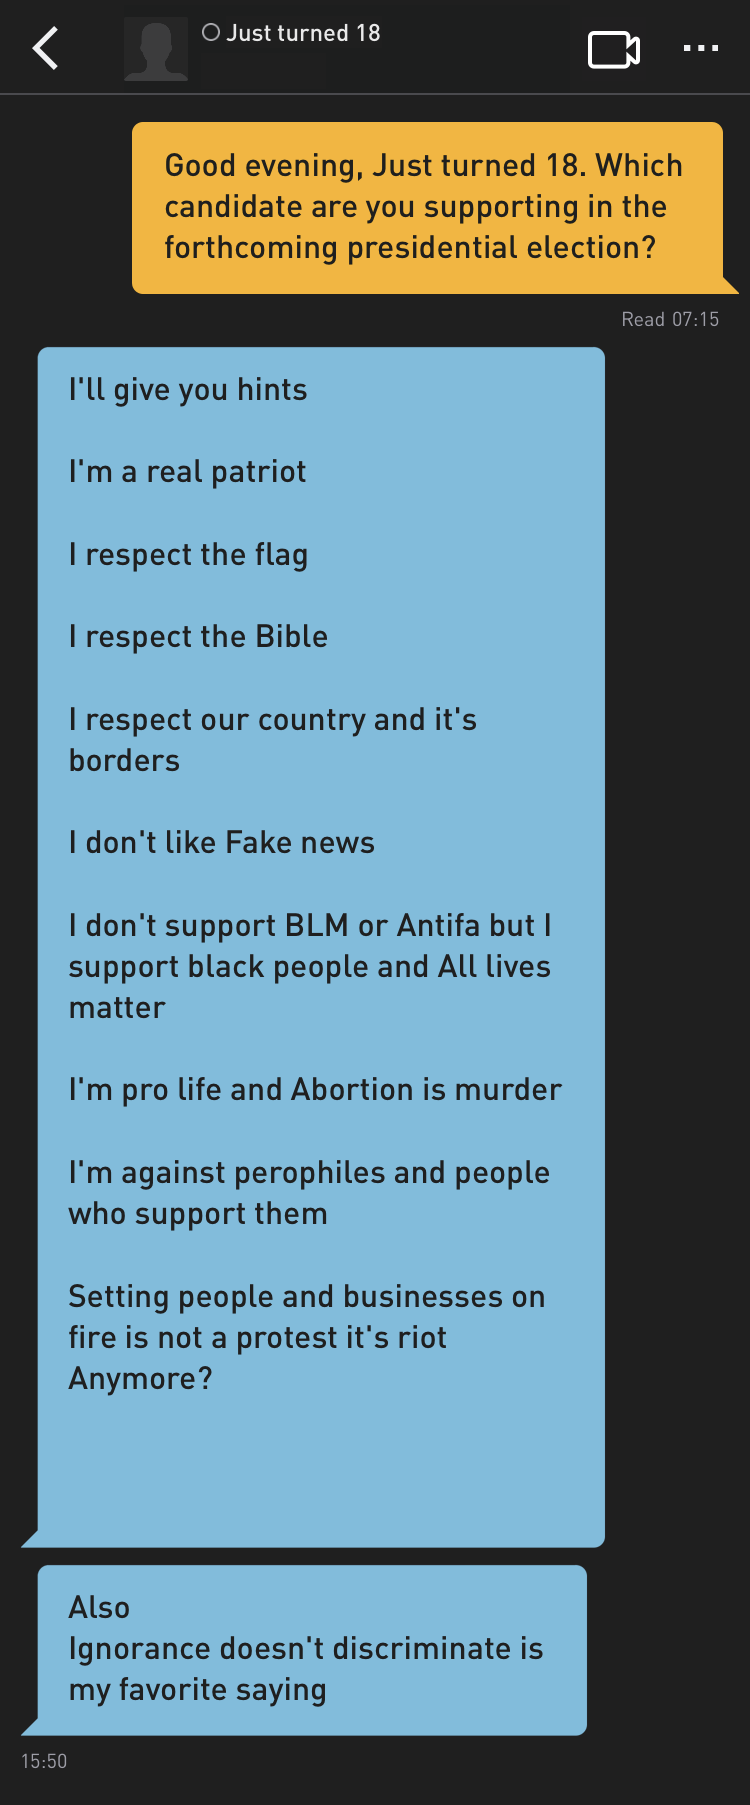 Me: Good evening, Just turned 18. Which candidate are you supporting in the forthcoming presidential election?
Just turned 18: I'll give you hints

I'm a real patriot

I respect the Bible

I respect our country and it's borders

I don't like Fake news

I don't support BLM or Antifa but I support black people and All lives matter

I'm pro life and Abortion is murder

I'm against perophiles and people who support them

Setting people and businesses on fire is not a protest it's riot
Anymore?



Just turned 18: Also
Ignorance doesn't discriminate is my favorite saying